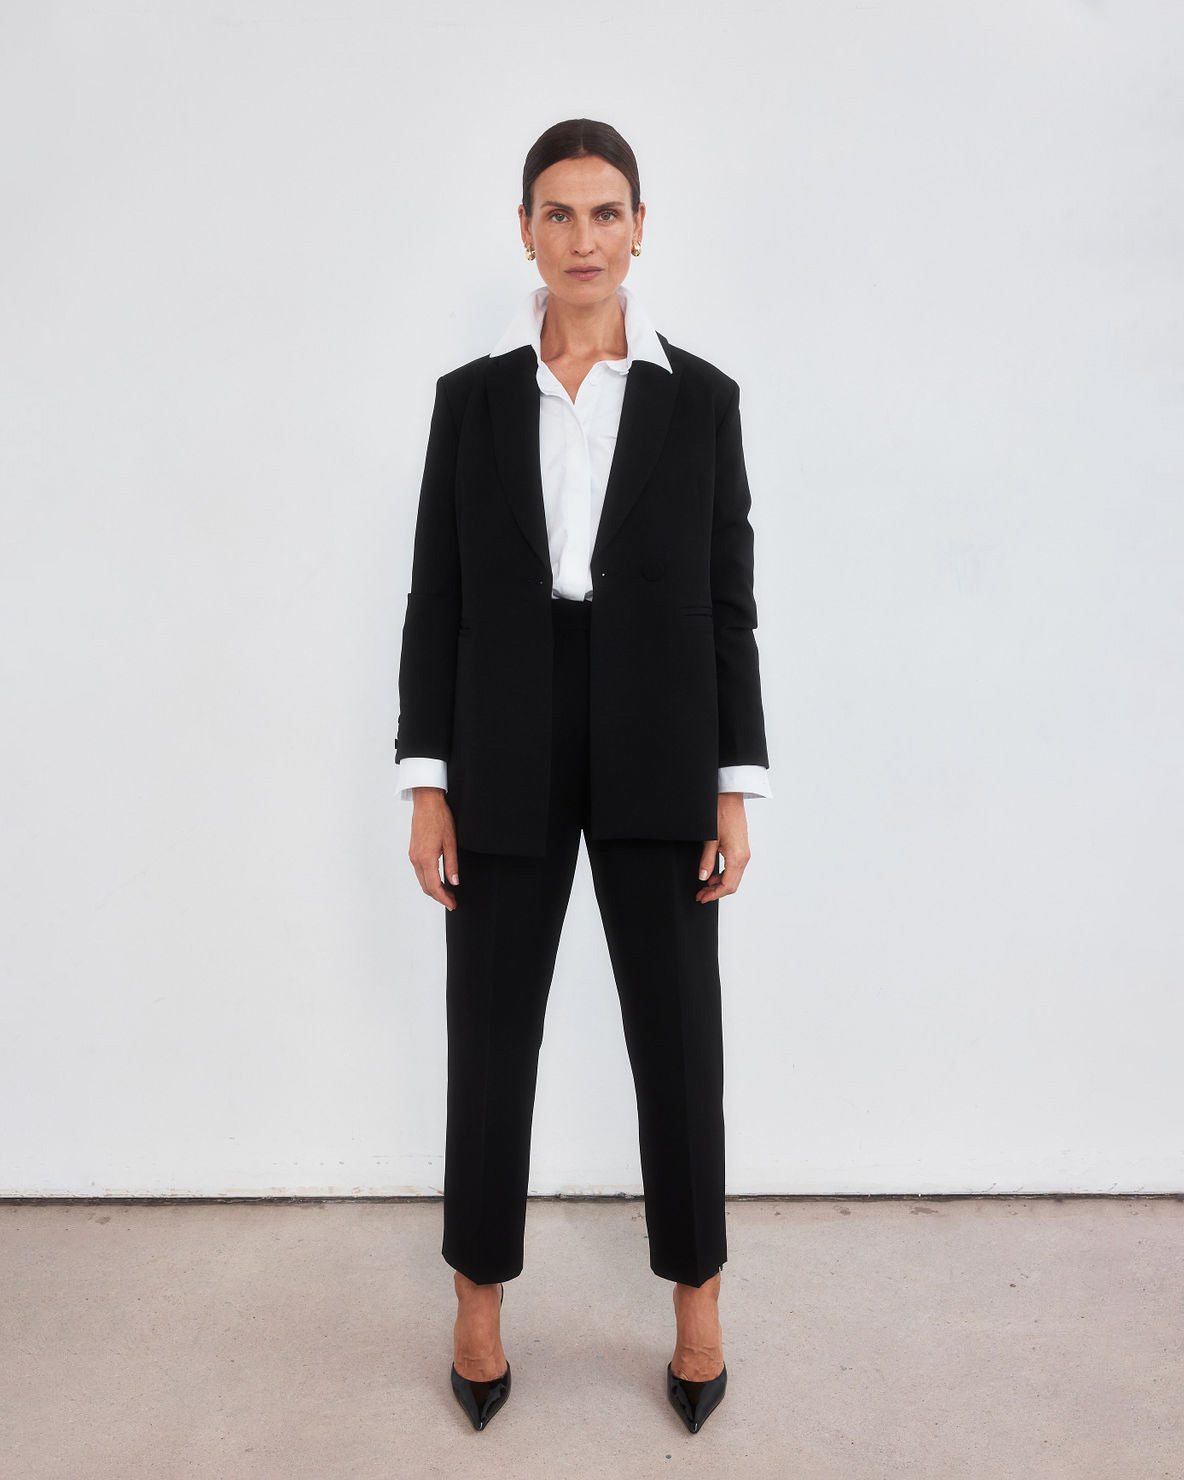 Middle aged women with brown pulled back hair wearing a  minimalistic tailored black blazer open with a crisp white shirt with the collar lifted up, neatly tucked into a pair of high-waisted black peg leg trousers which crop just above the ankle